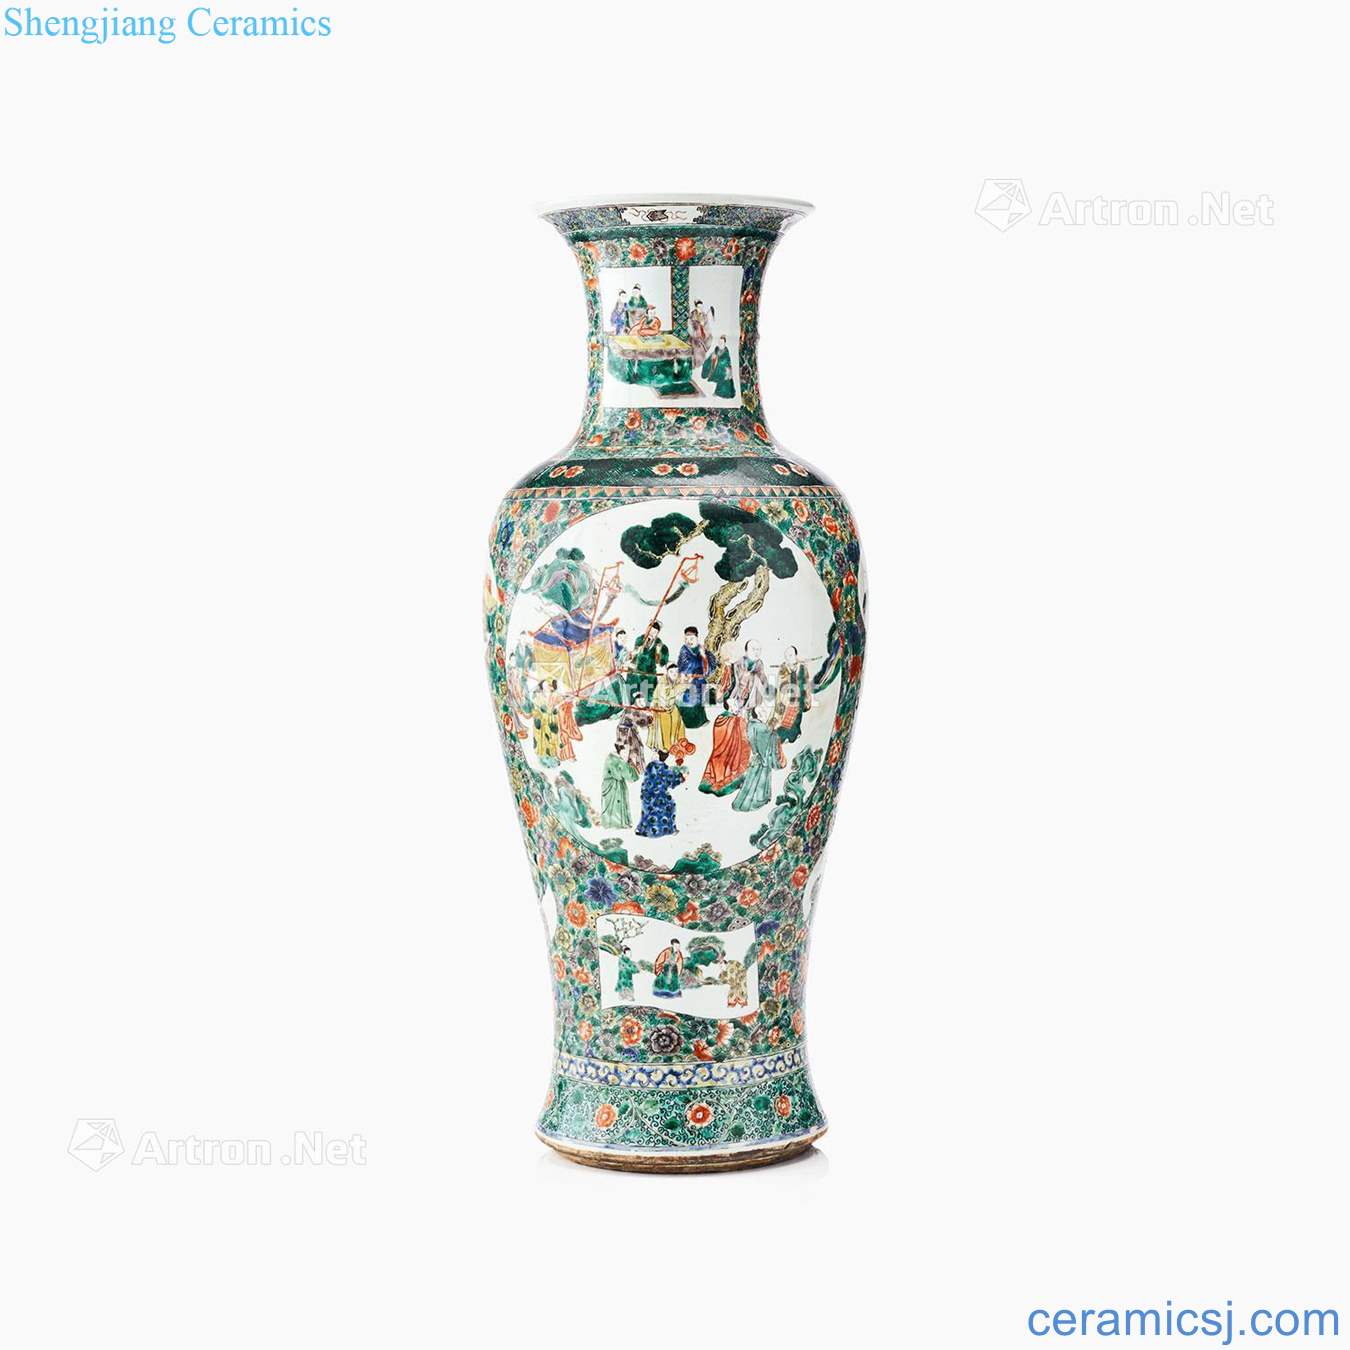 In the 19th century Large bottles of colorful characters